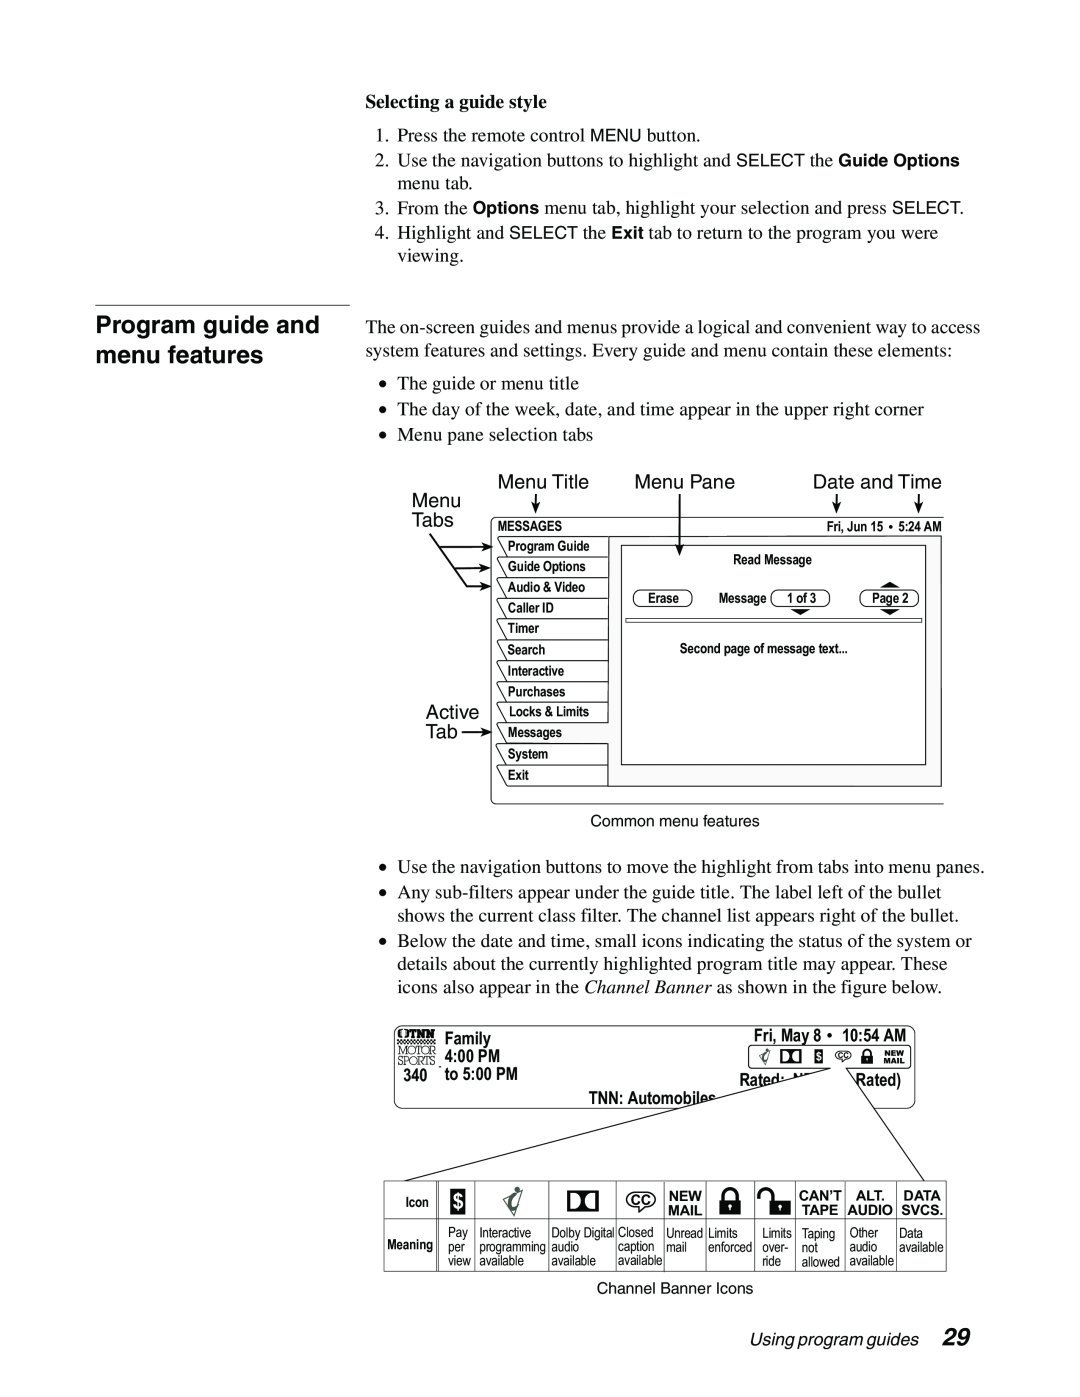 Sony SAT-B65, SAT-A65 Program guide and menu features, Selecting a guide style, Menu Title, Tabs, Active, Menu Pane 